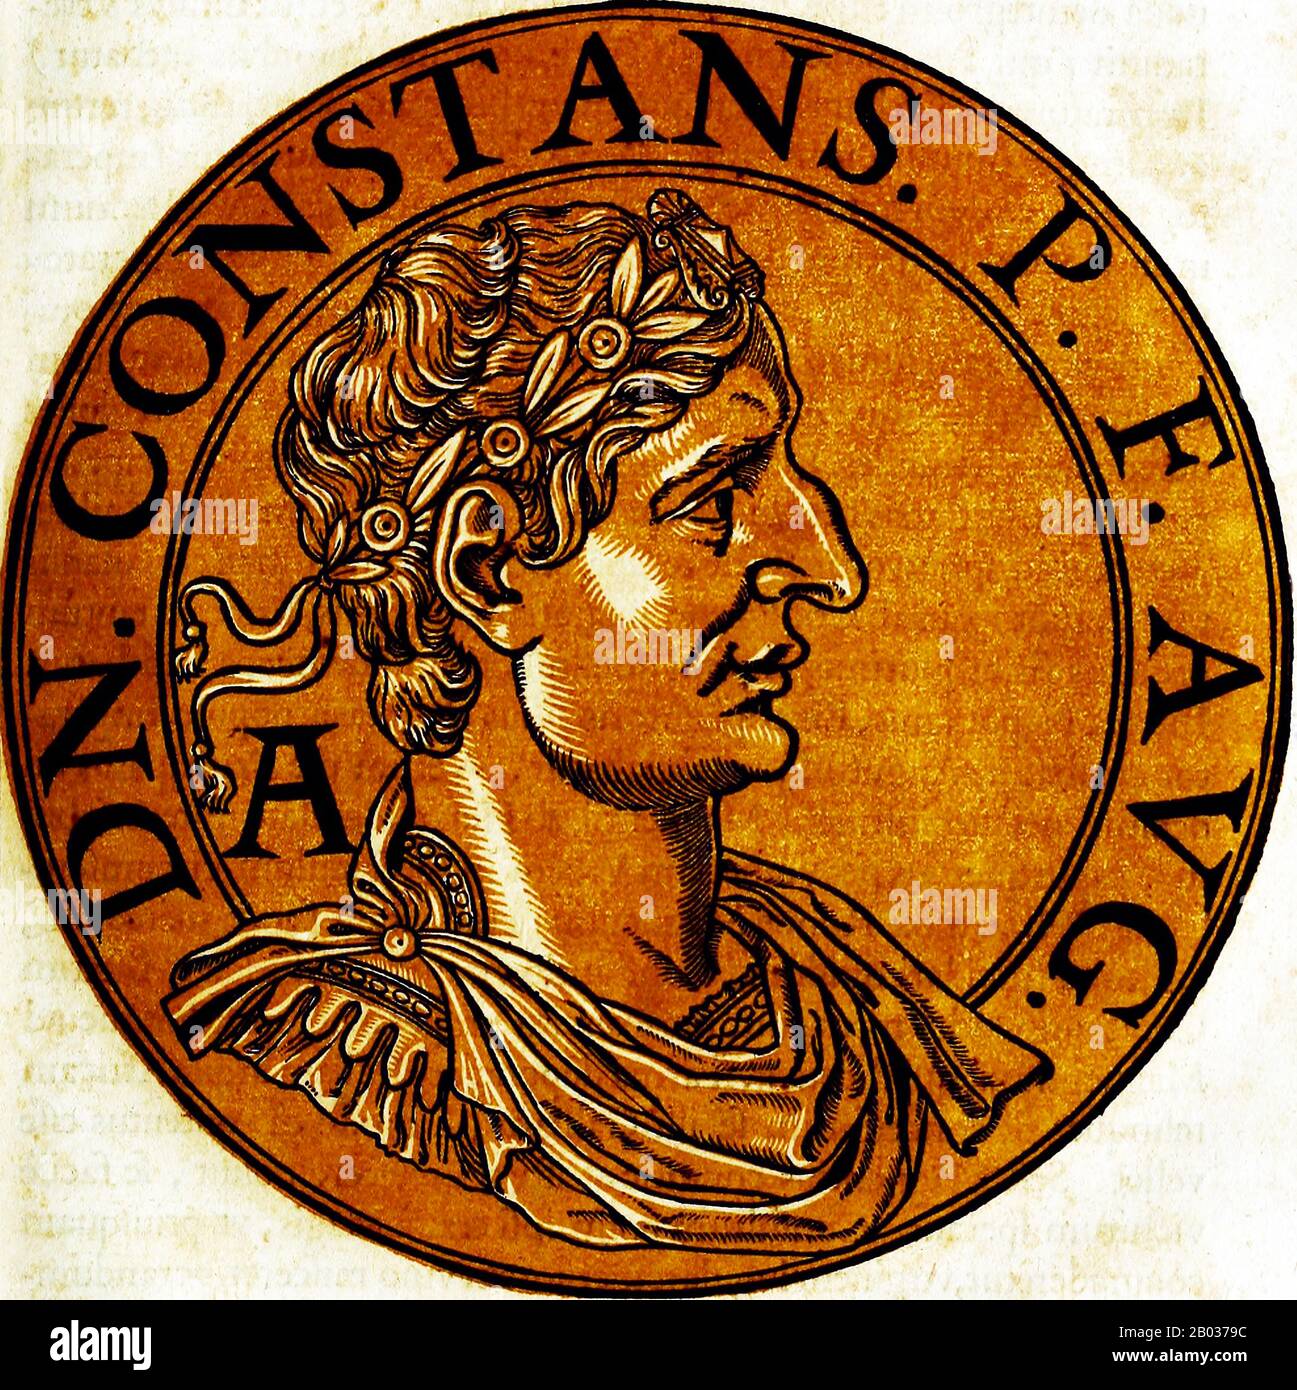 Constans I (323-350) was the fourth son of Constantine the Great, youngest brother to Constantine II and Constantius II. When his father died in 337, Constans became co-emperor alongside his brothers, with Constantius' purge of practically the rest of the imperial family ensuring power stayed in their hands.  Constans inherited the central provinces of the Roman Empire in the formal partitioning, but was initially under the guardianship of Constantine II due to his young age. His older brother complained that he had not received the amount of territory that was his due as eldest son, which led Stock Photo